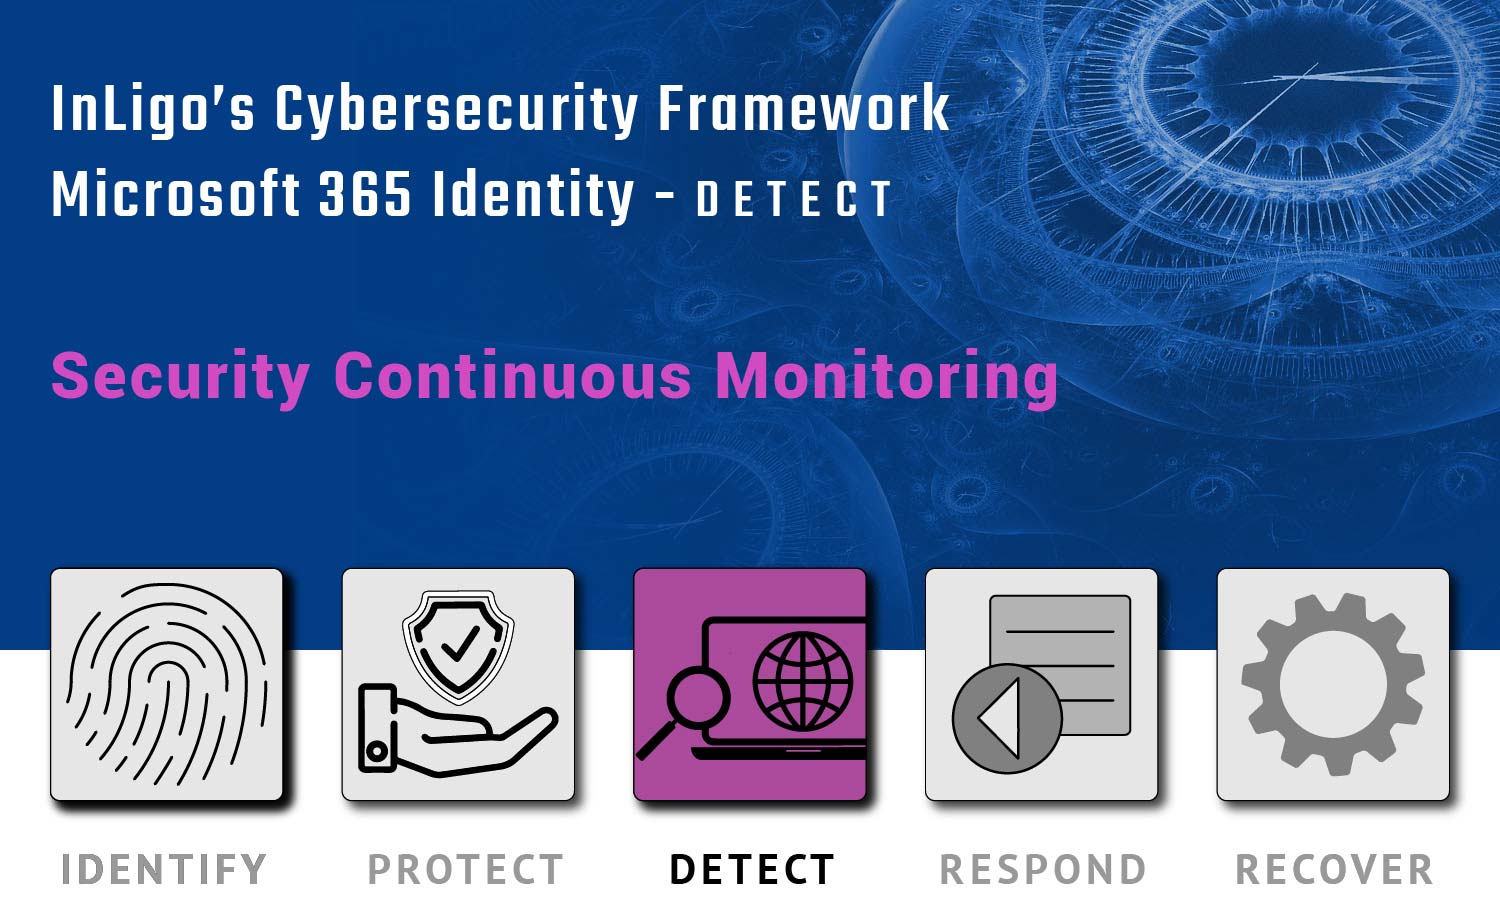 Security Continuous Monitoring